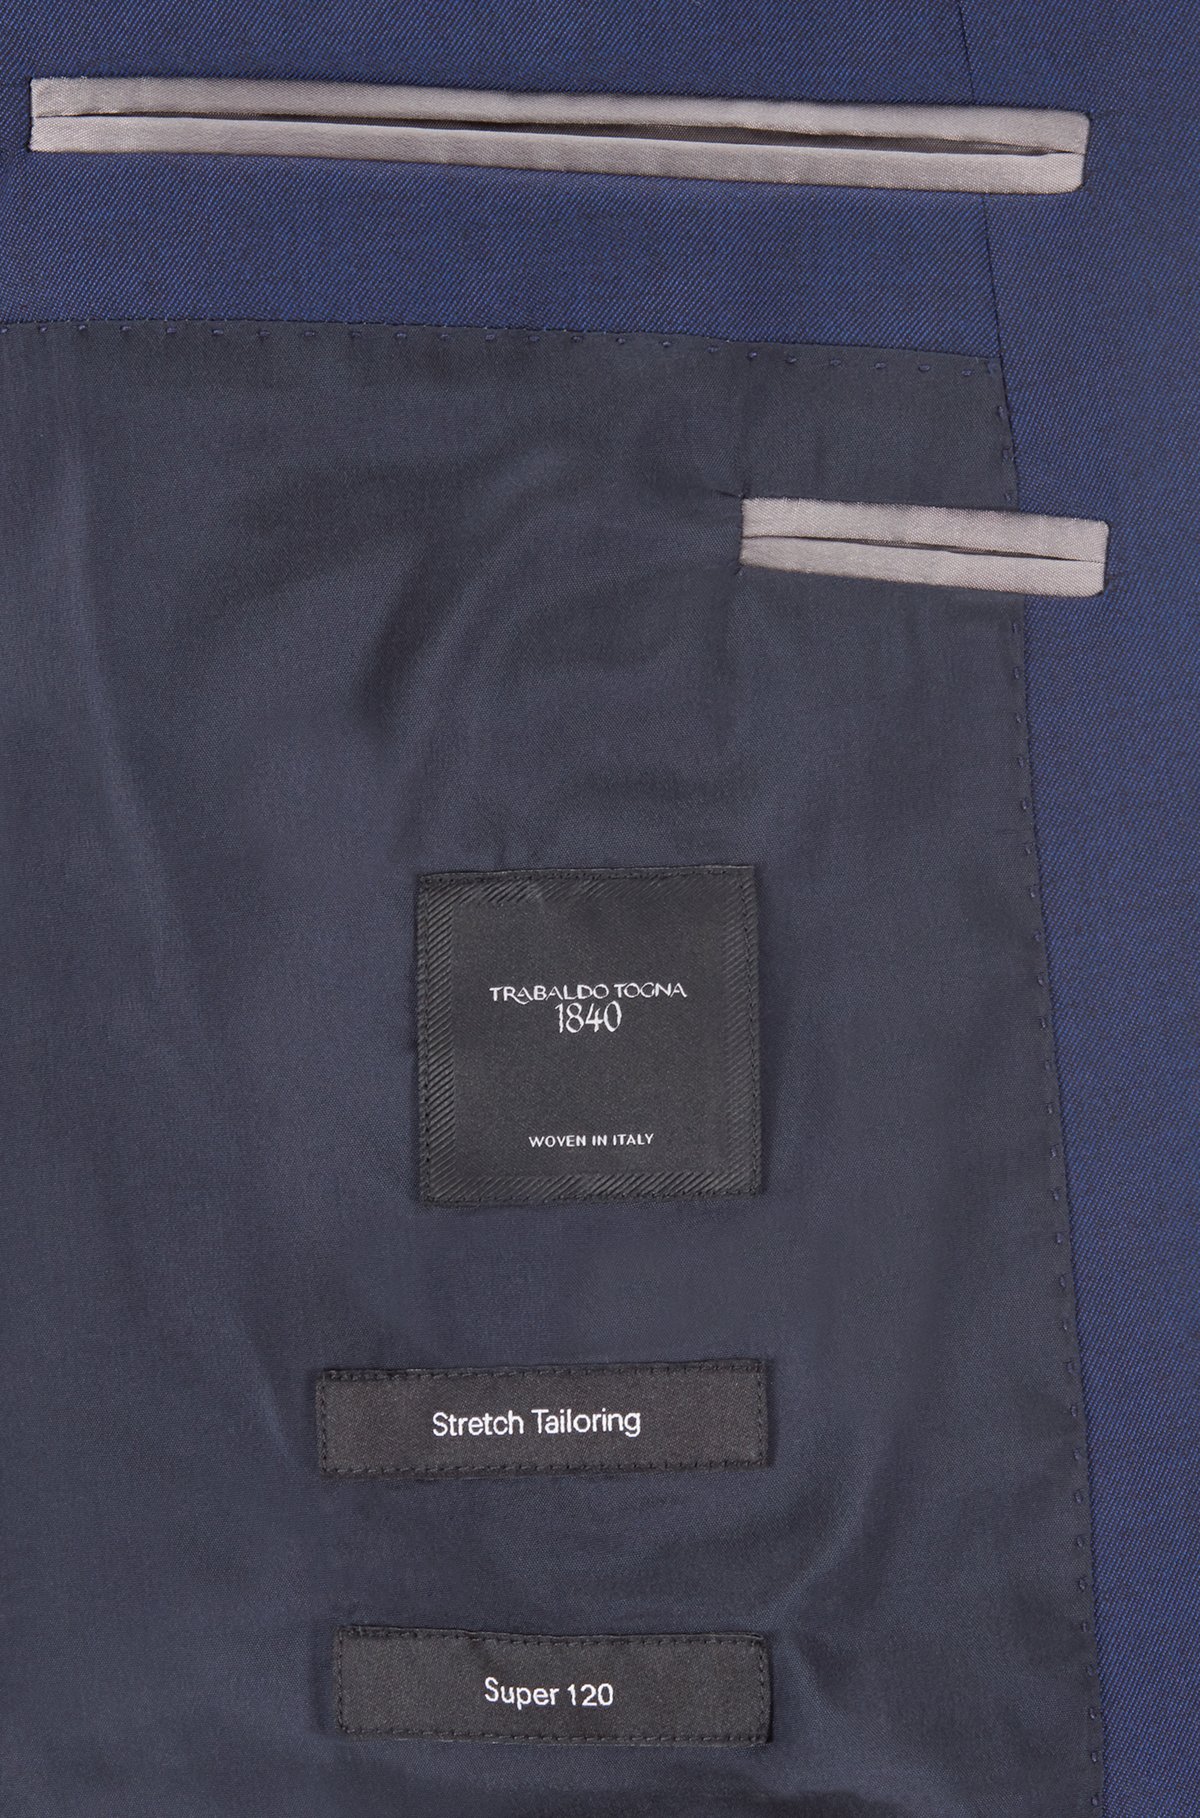 Slim-fit suit in virgin wool with natural stretch, Dark Blue